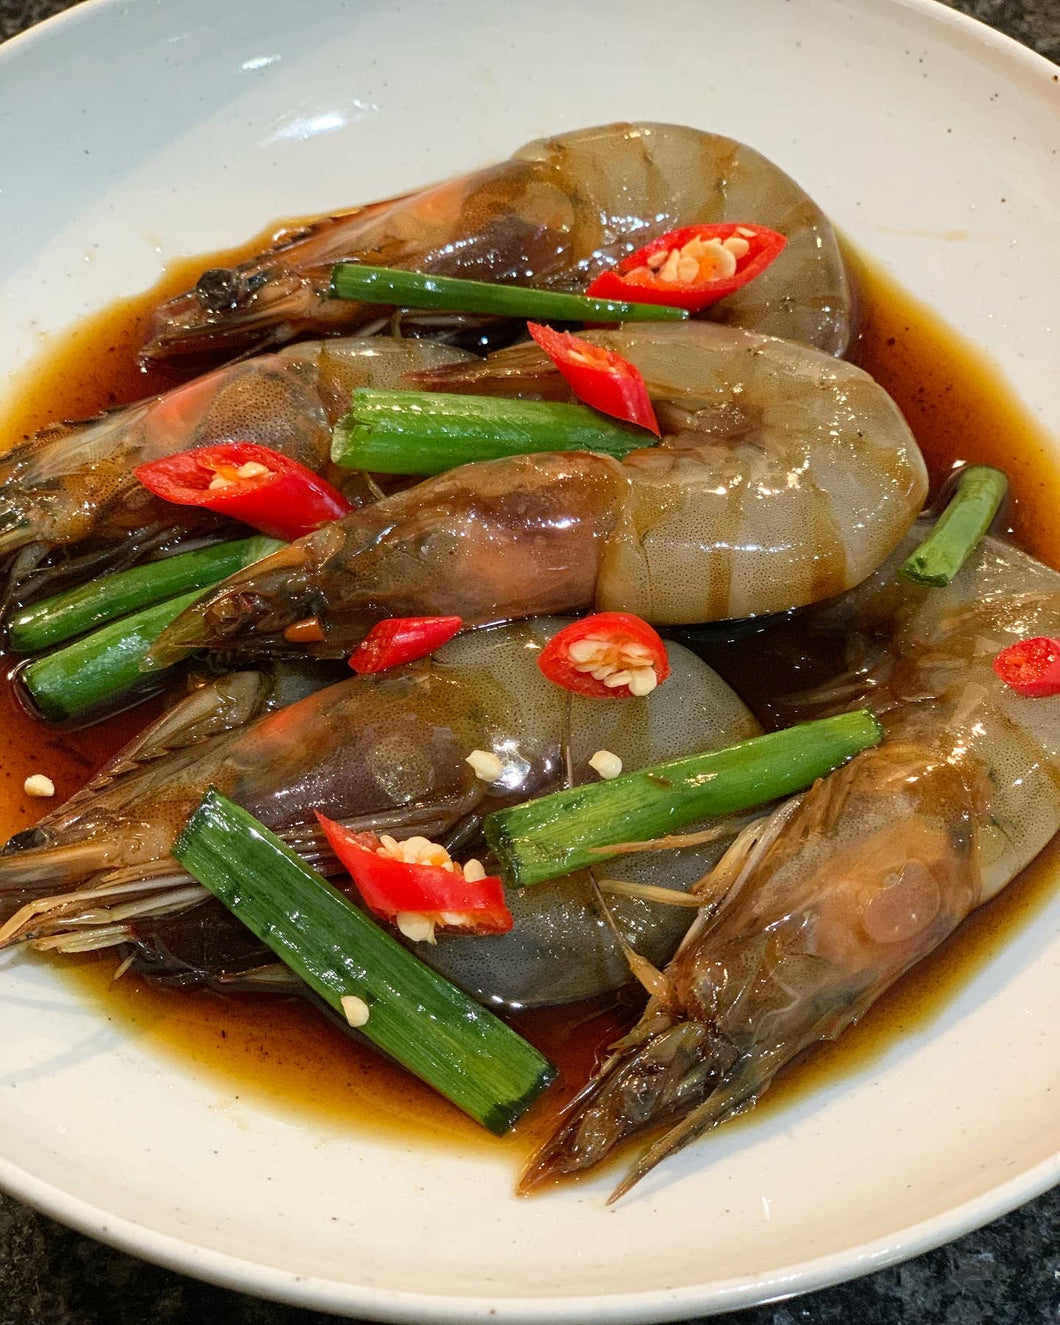 A plate of shrimps marinating in soy sauce